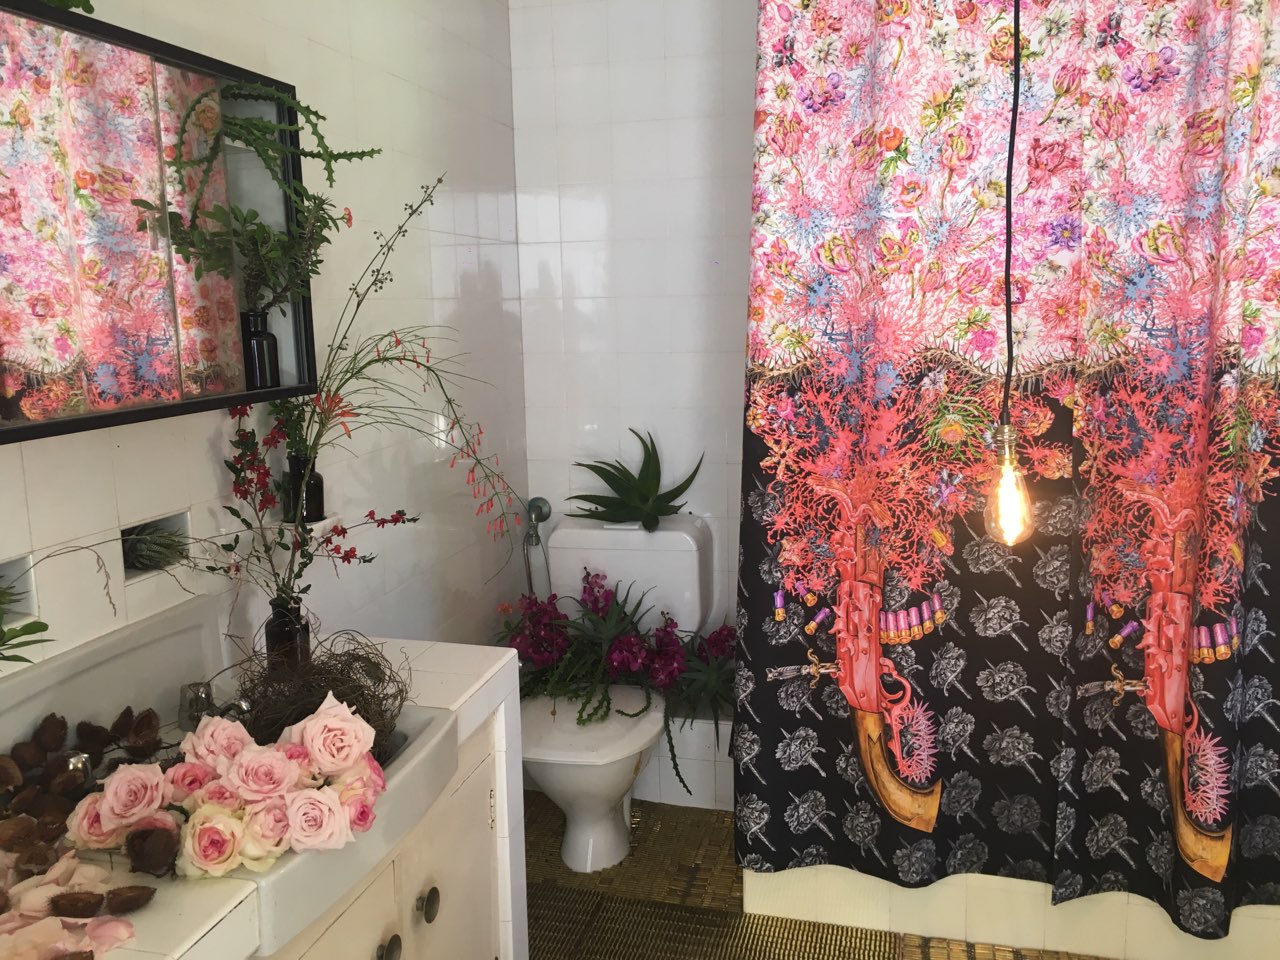 A bathroom with flower arrangements on the toilet and vanity and a detailed shower curtain displaying complex pattern of weapons and flowers.